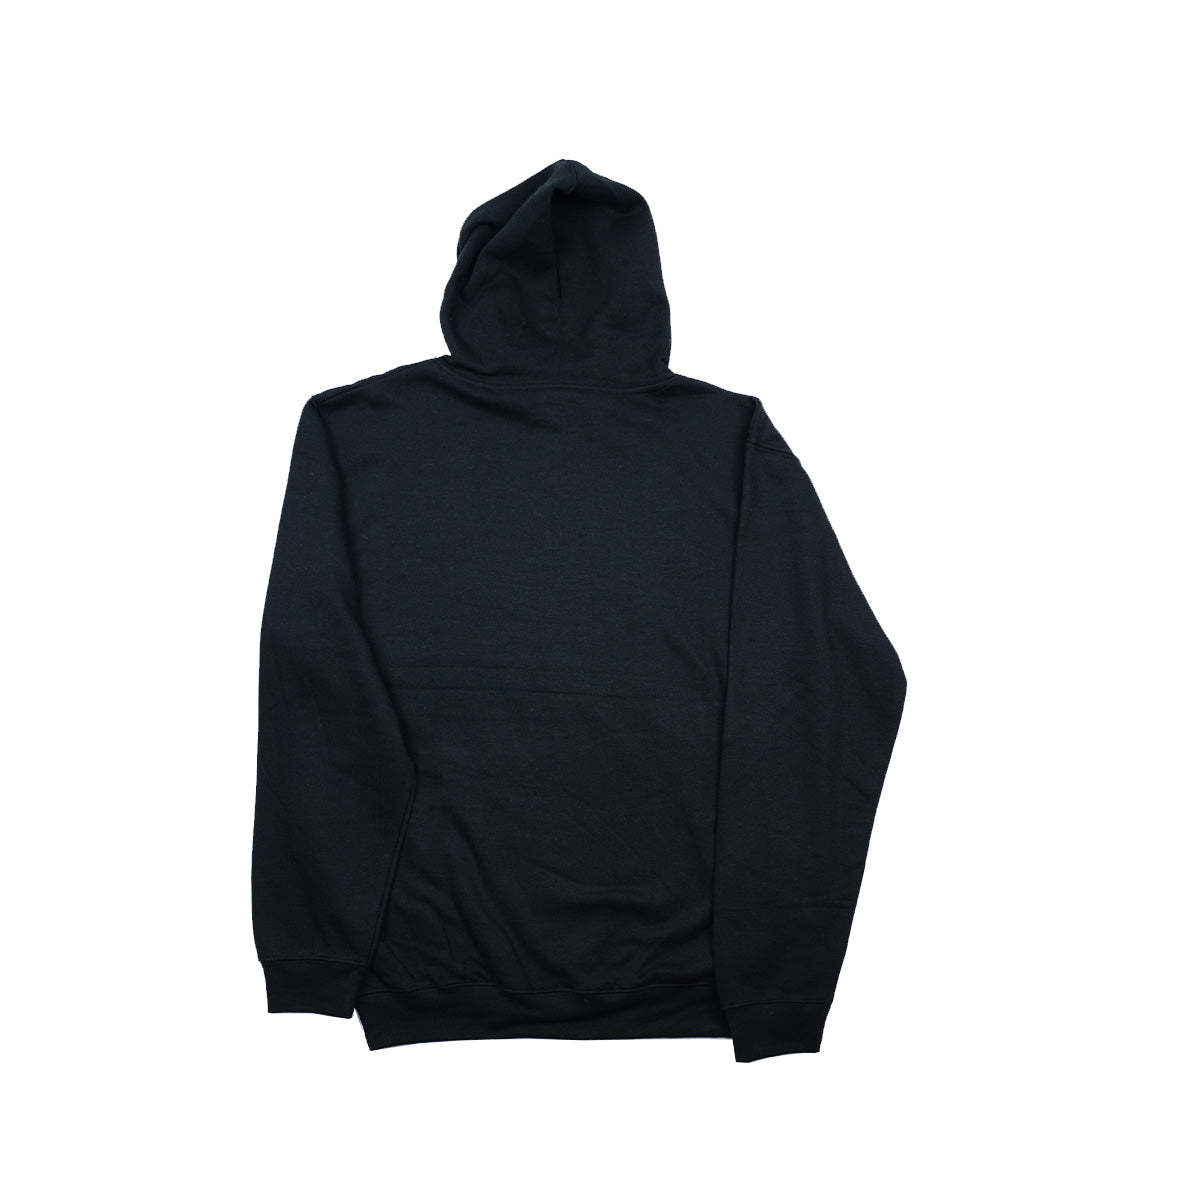 6 Pieces Pack of Black Hoodie "GOAT" 1S-2M-2L-1XL